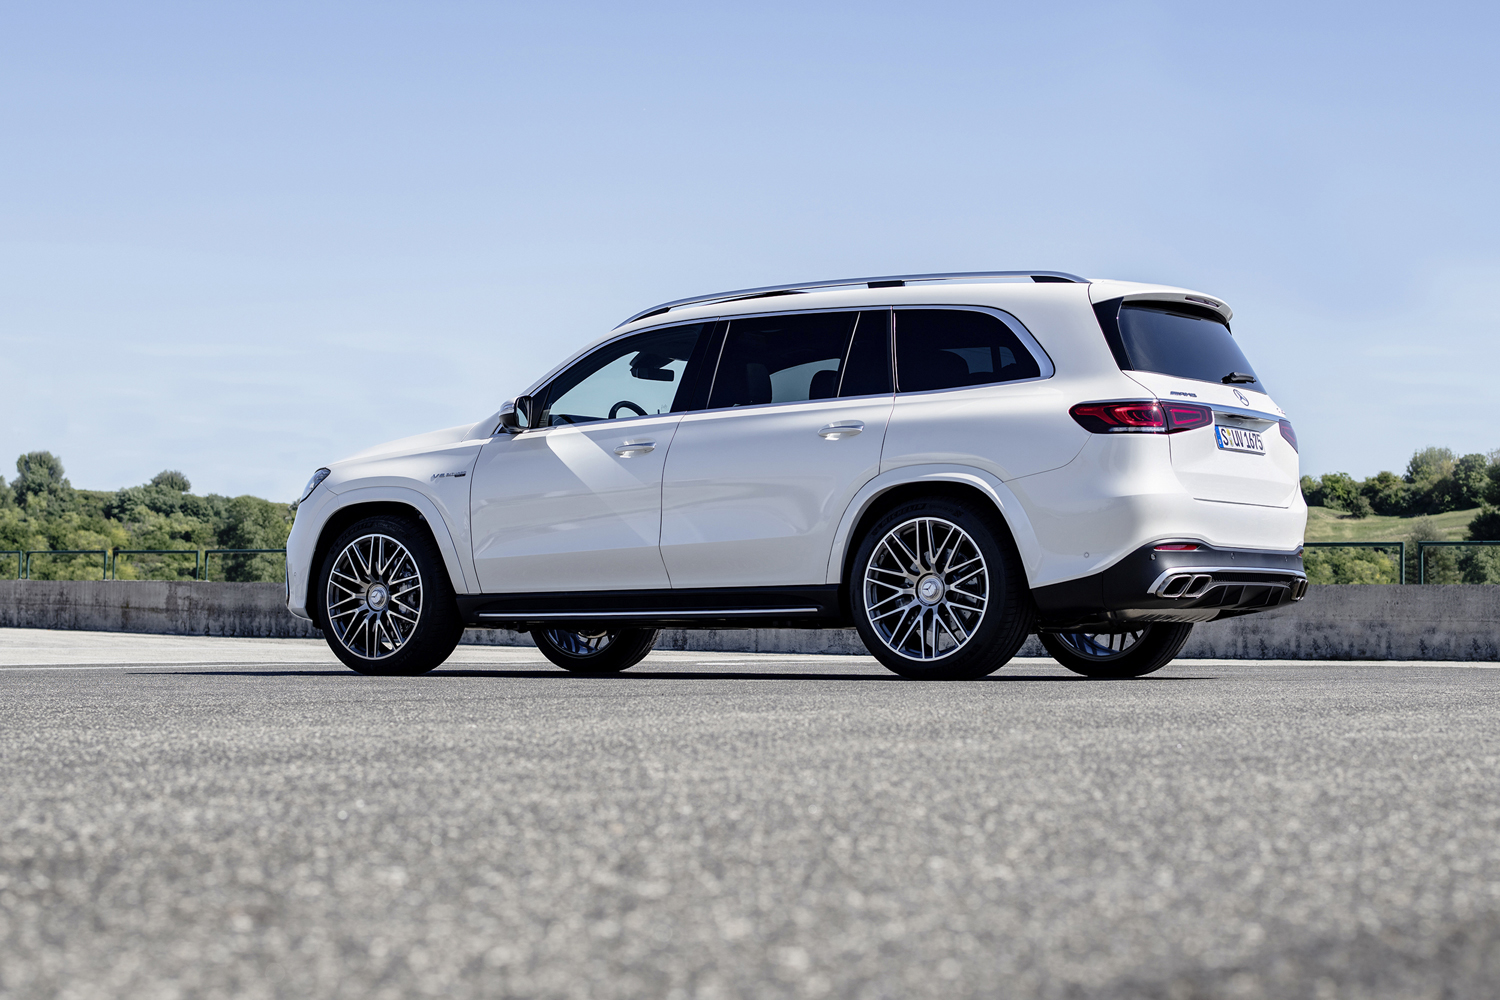 2019 los angeles auto show round up pictures and trends mercedes amg gls 63 4matic